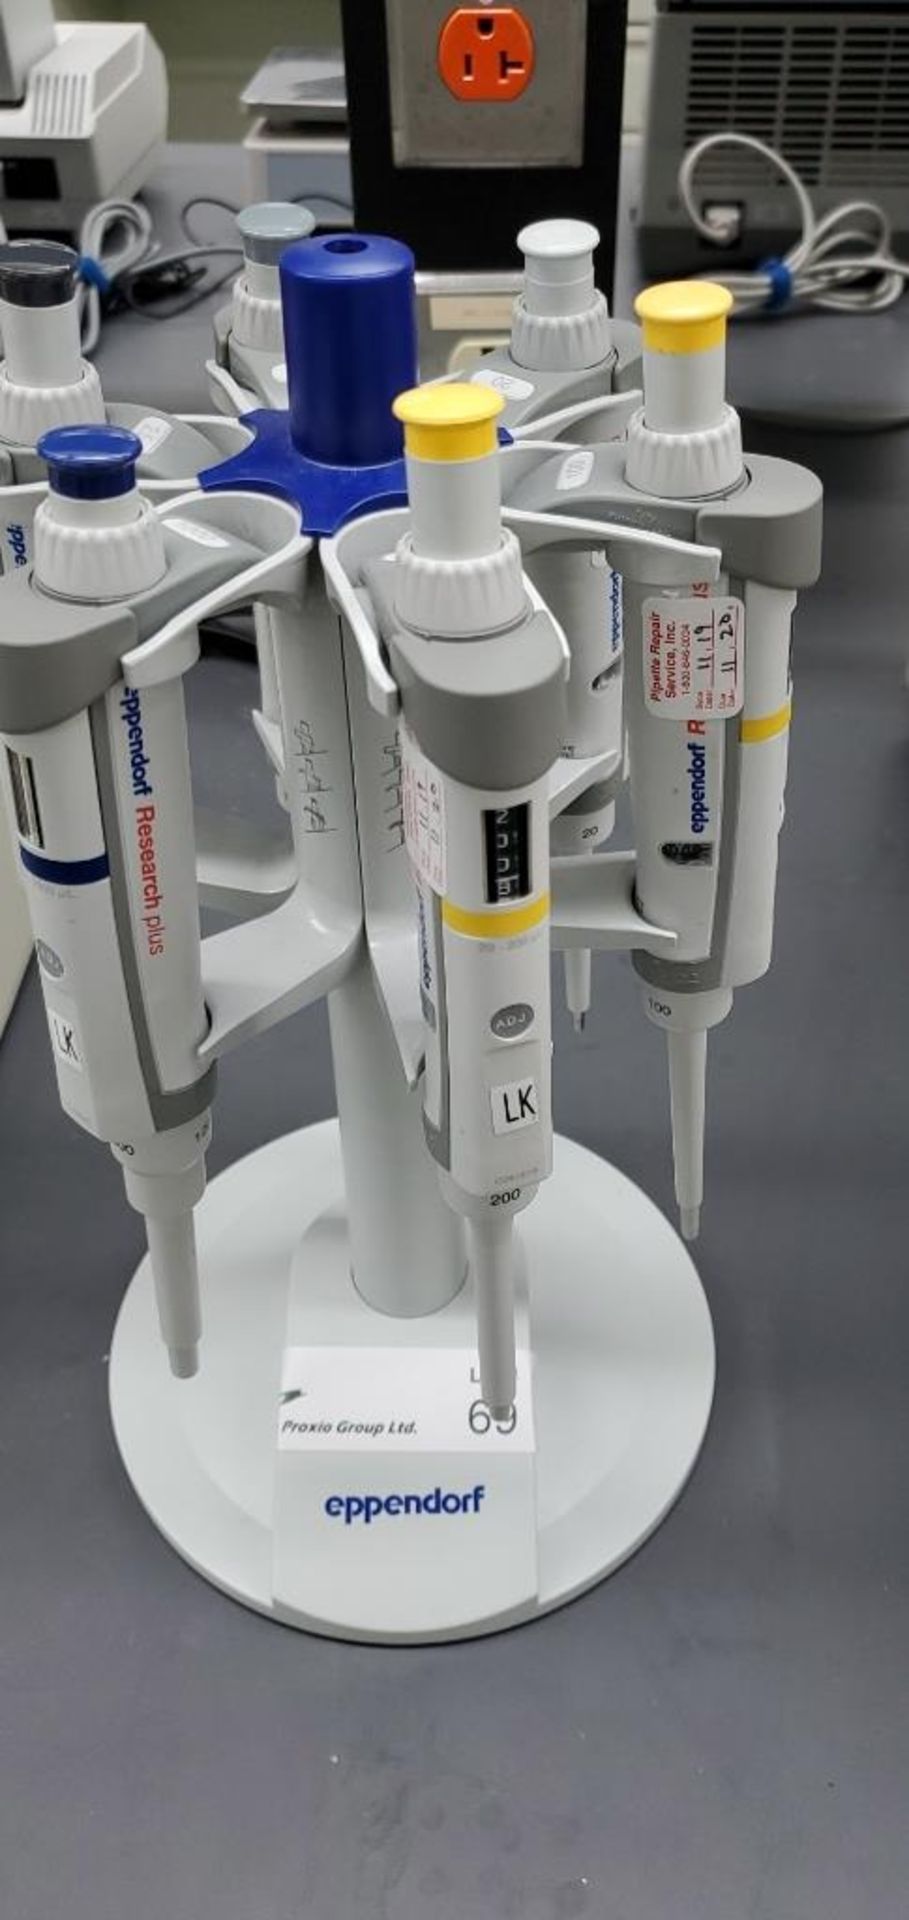 Eppendorf 7-Piece Pipette Set - Image 3 of 4